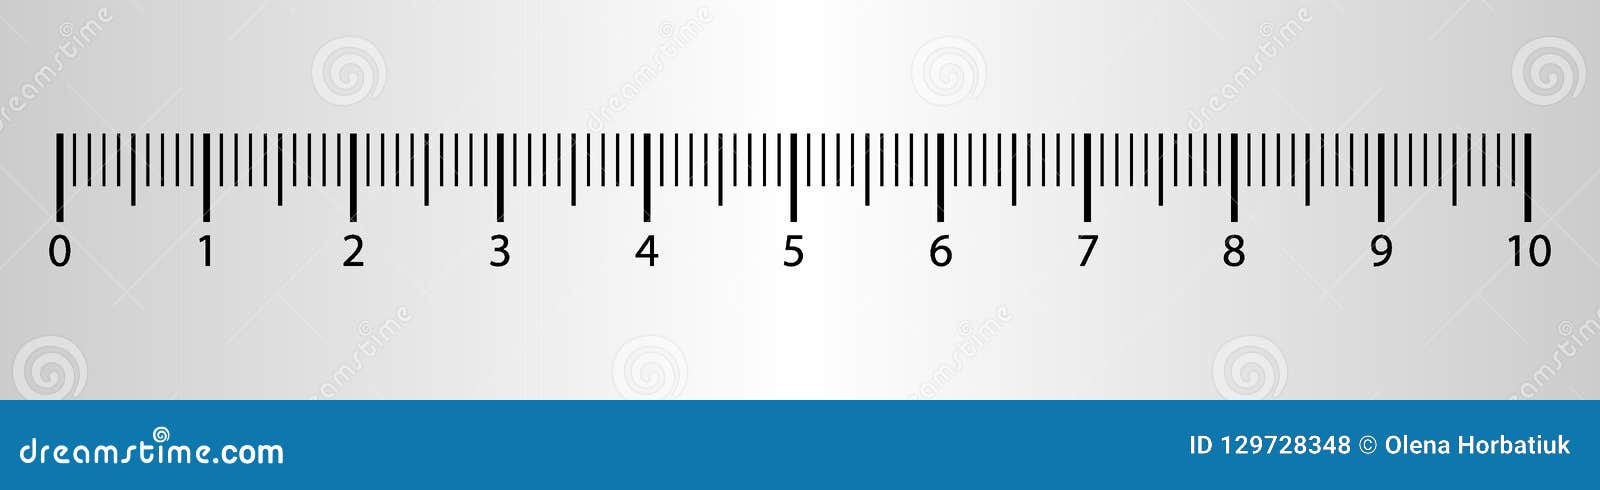 10 Centimeters Ruler Measurement Tool With Numbers Scale Vector Cm Chart With Millimeter Grid System Stock Illustration Illustration Of Indicator Geometry